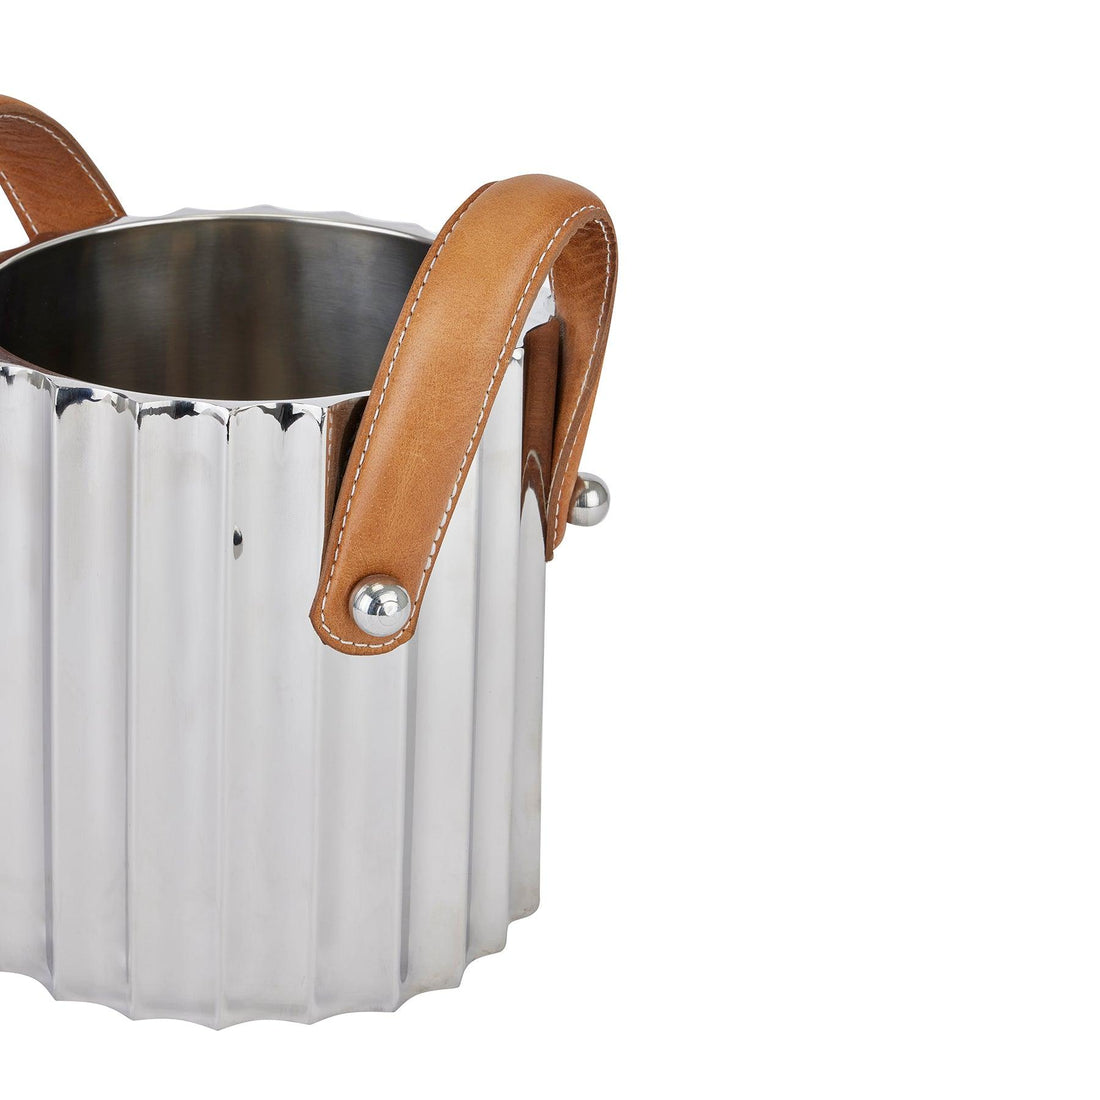 Silver Fluted Leather Handled Single Champagne Cooler - £89.95 - Gifts & Accessories > Kitchen And Tableware > Ornaments 